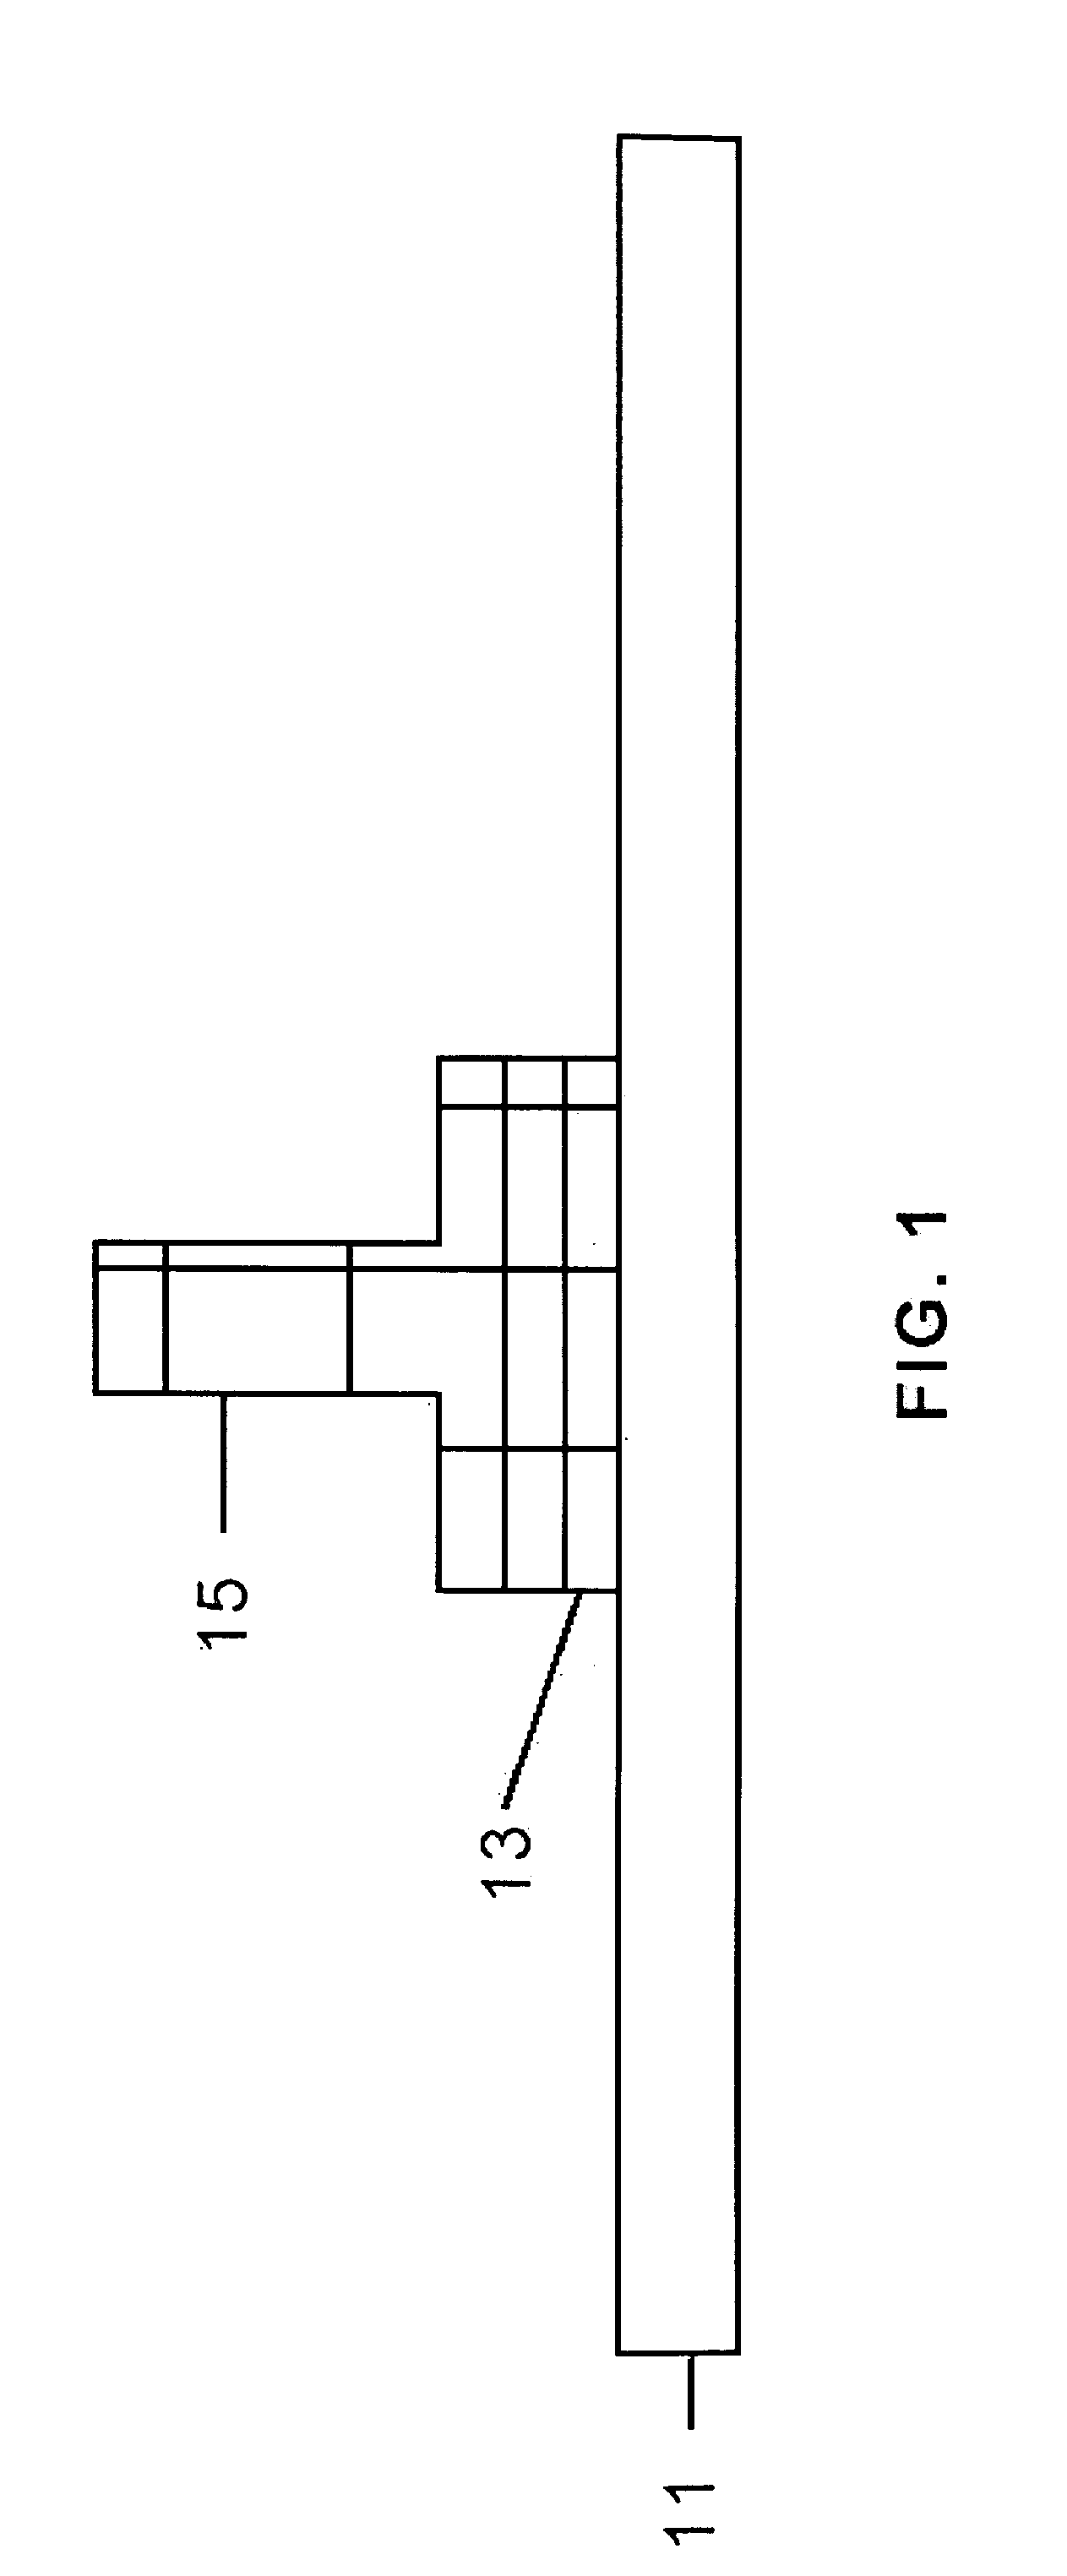 Method for simulating the behavior of a bonded joint of two parts